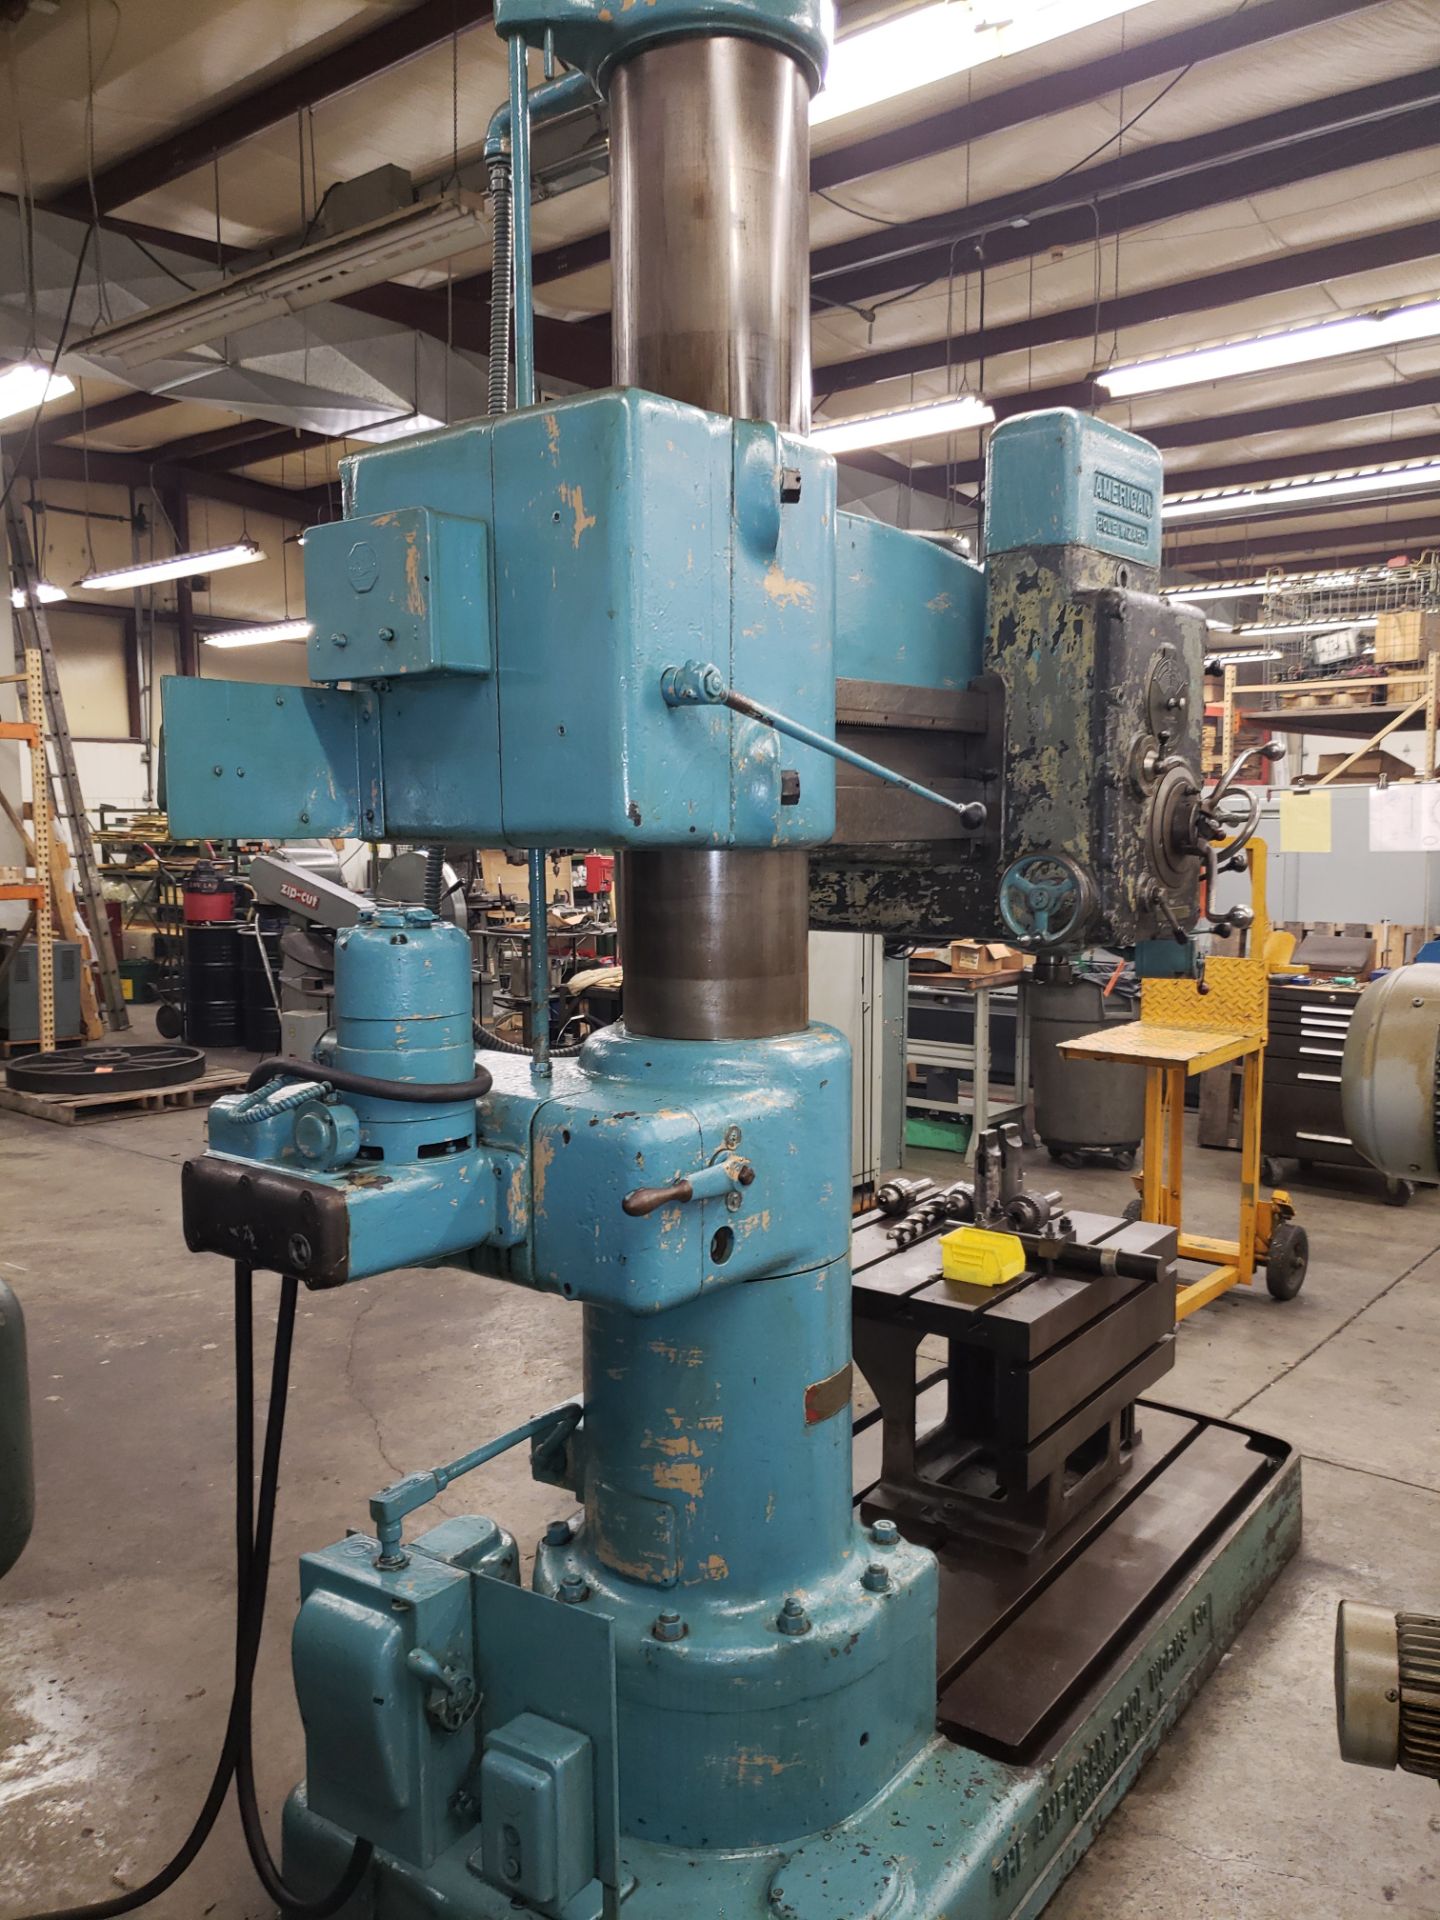 AMERICAN HOLE WIZARD RADIAL DRILL 4' 11" COL. (LOCATED AT: 3919 ENGLE ROAD, FORT WAYNE, IN 46804) - Image 5 of 5